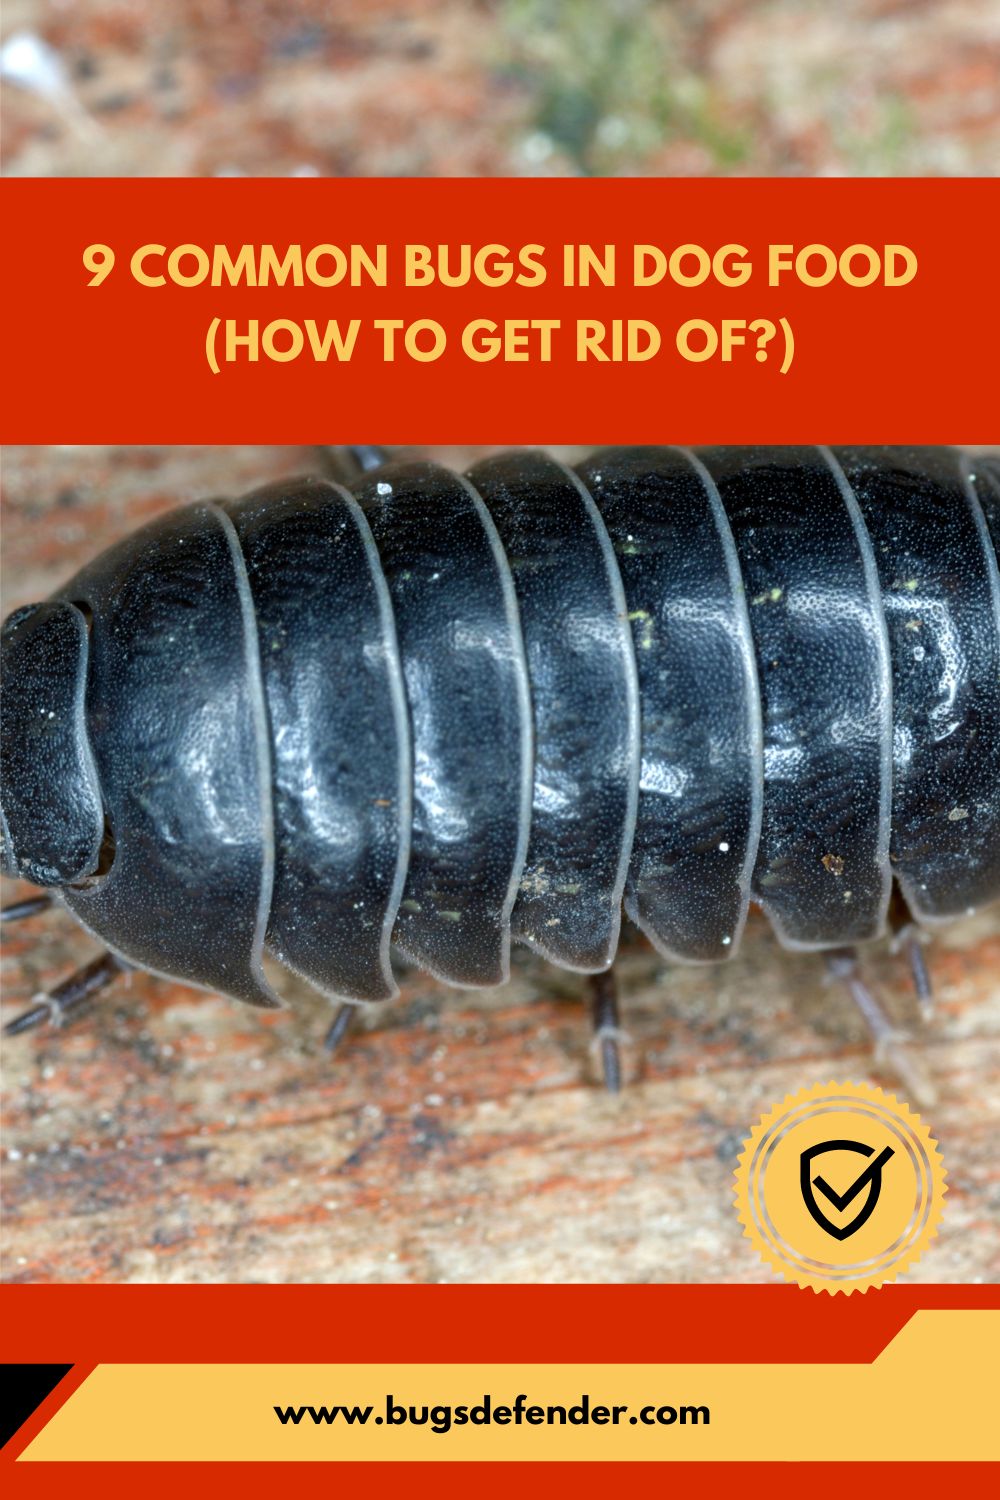 9 Common Bugs in Dog Food (How to Get Rid of) pin1